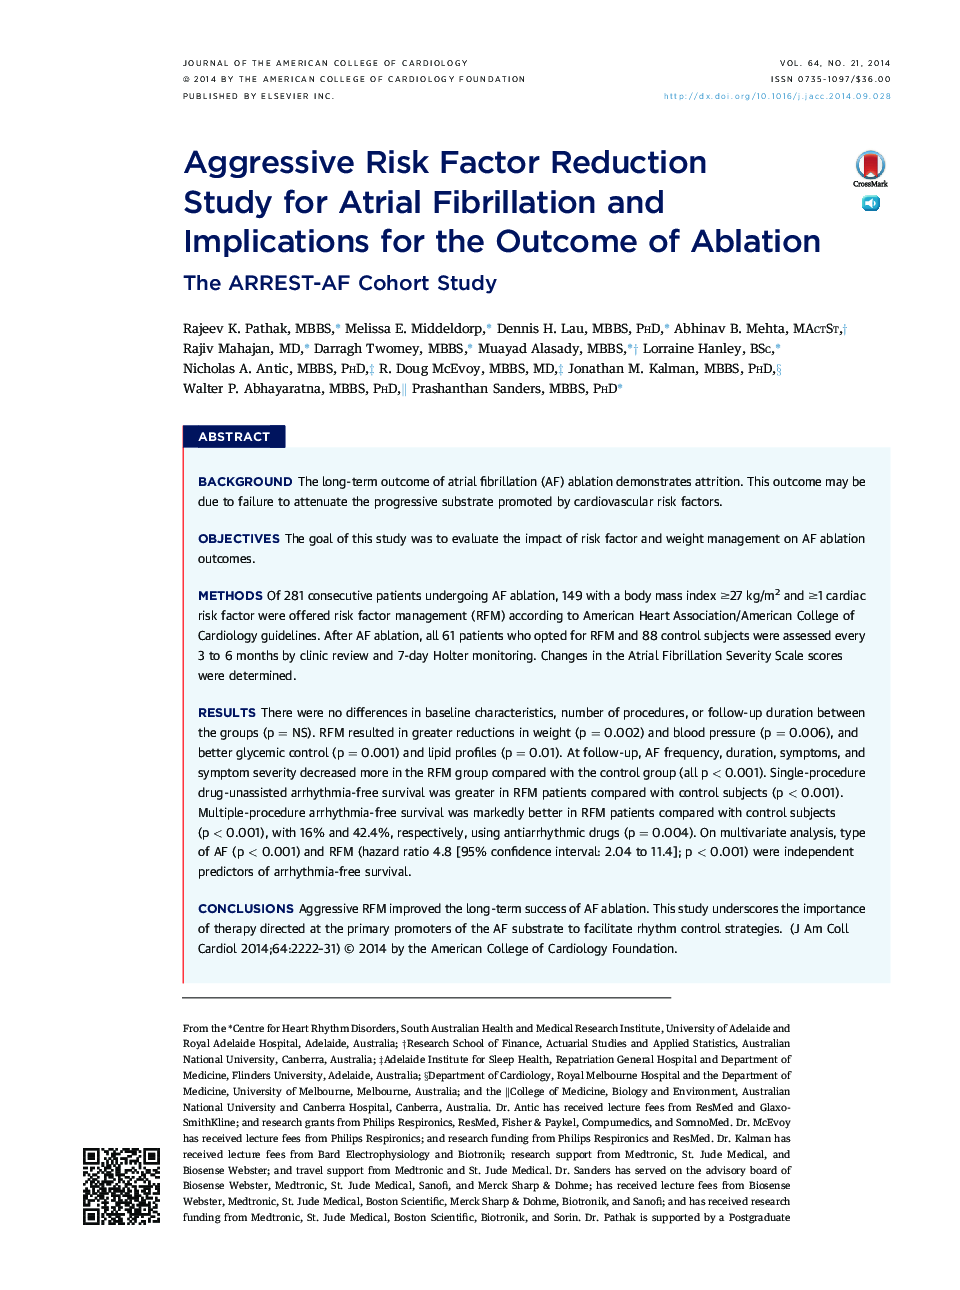 Aggressive Risk Factor Reduction Study for Atrial Fibrillation and Implications for the Outcome of Ablation : The ARREST-AF Cohort Study